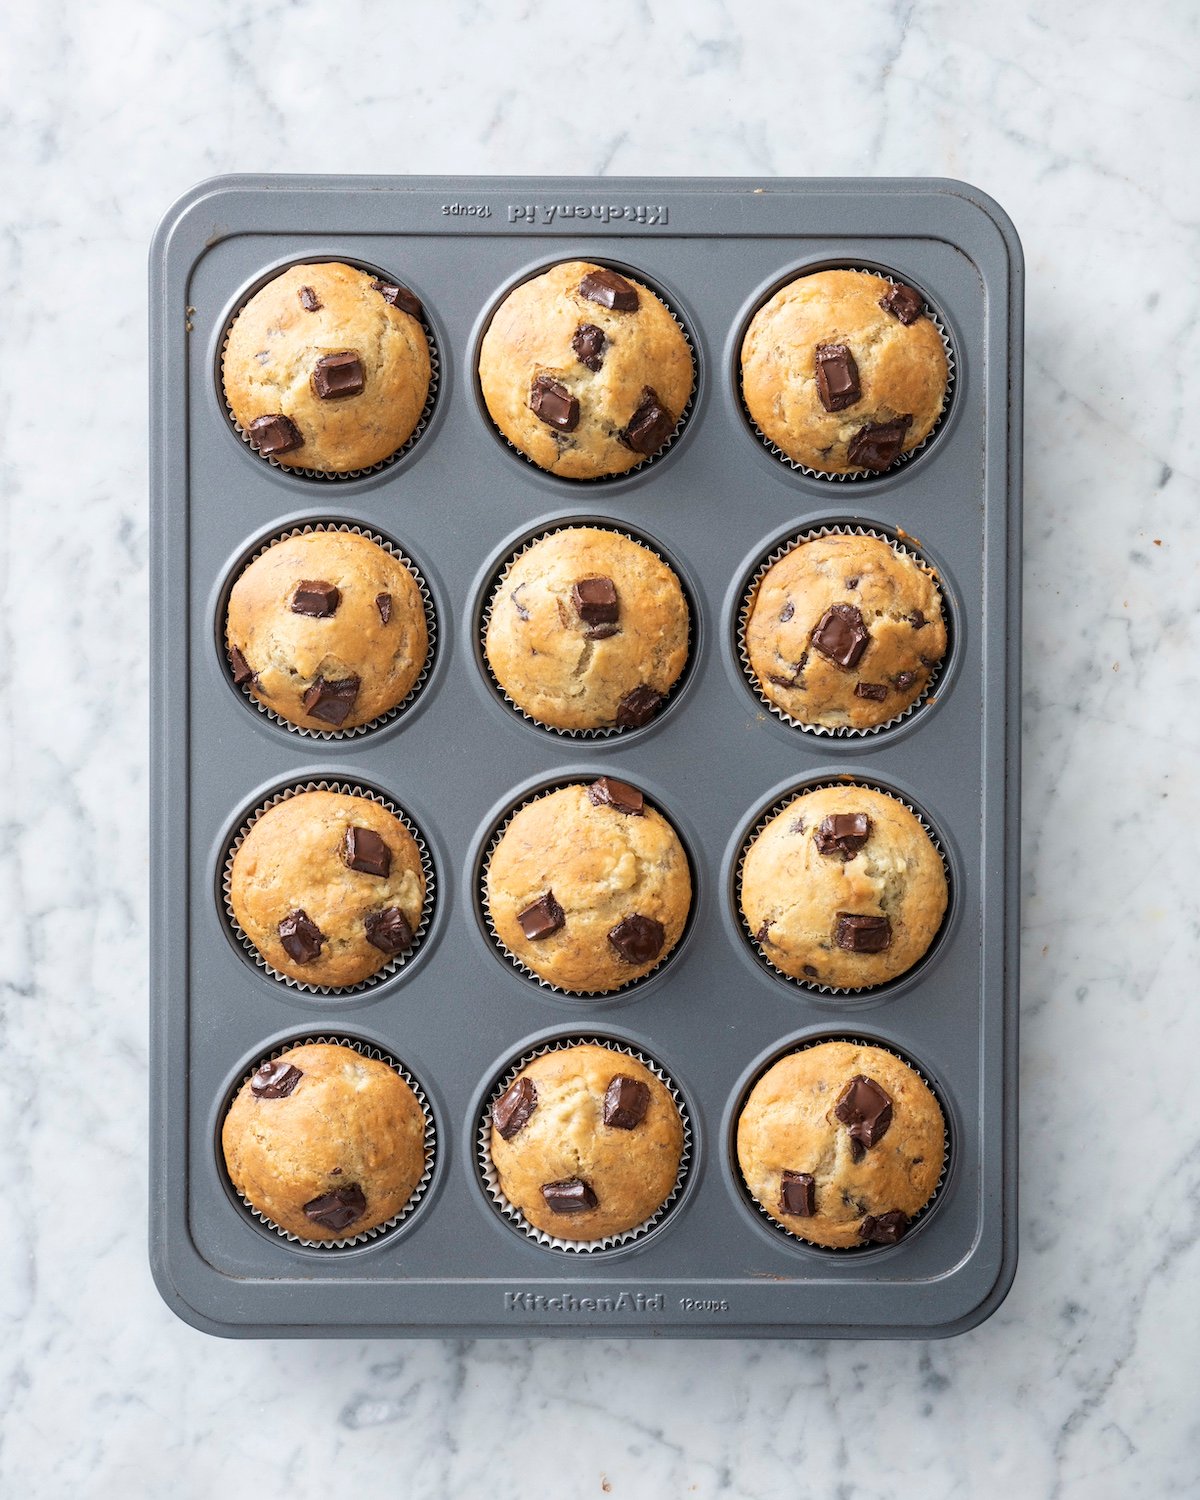 Banana chocolate chip muffins baked in muffin tin.